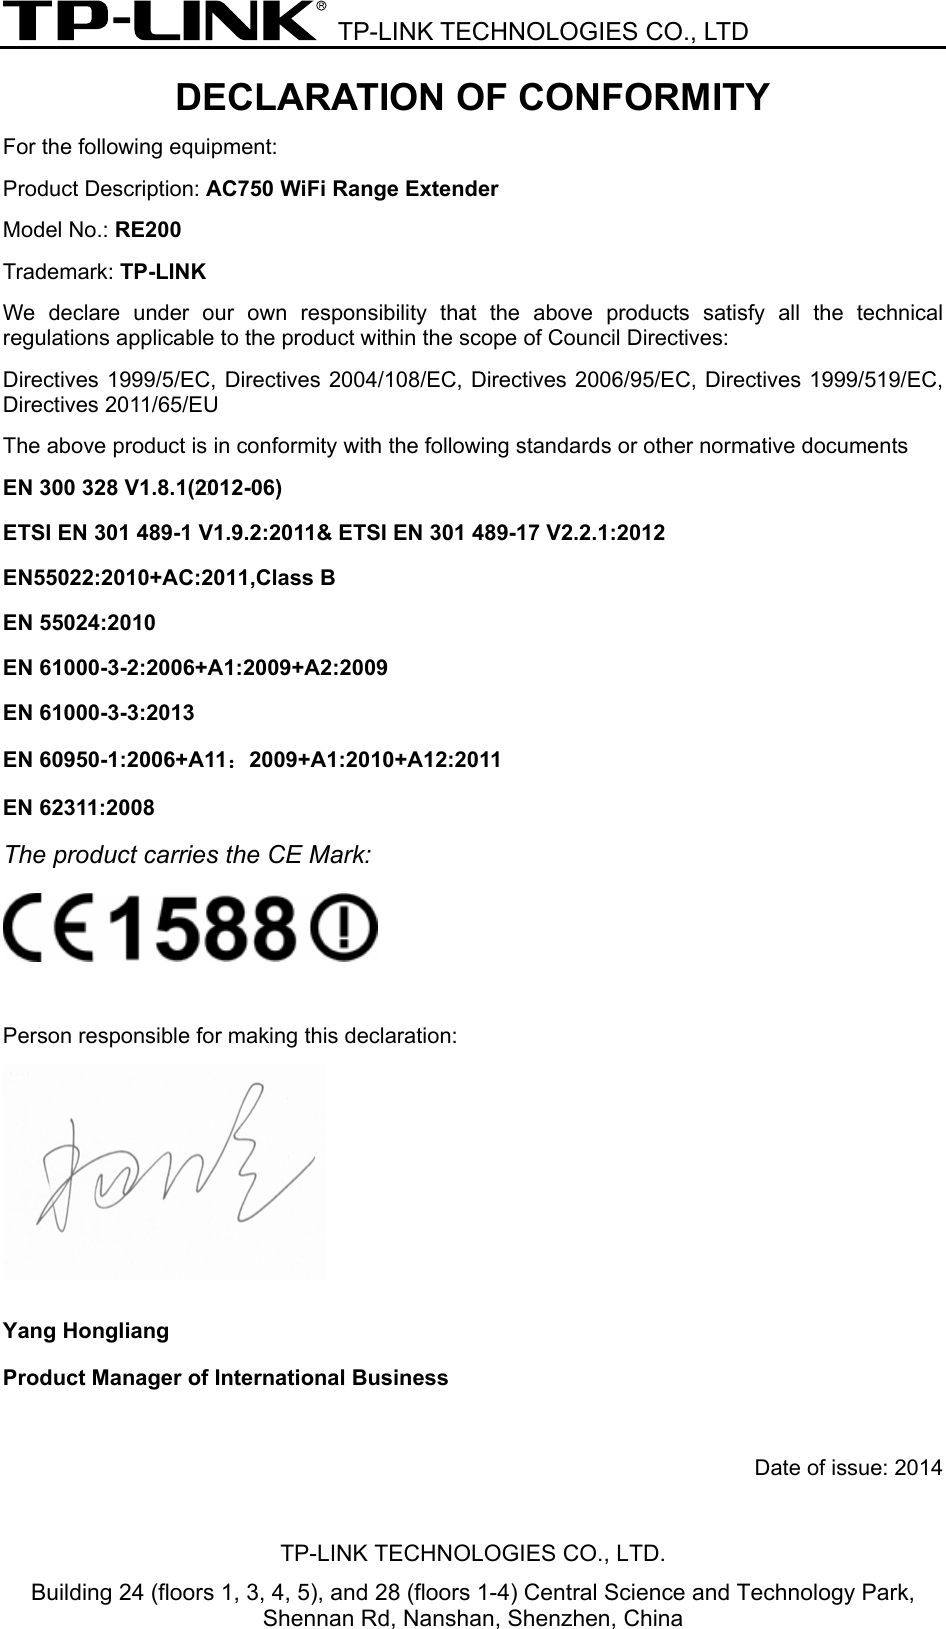  TP-LINK TECHNOLOGIES CO., LTD DECLARATION OF CONFORMITY For the following equipment: Product Description: AC750 WiFi Range Extender Model No.: RE200   Trademark: TP-LINK    We declare under our own responsibility that the above products satisfy all the technical regulations applicable to the product within the scope of Council Directives:     Directives 1999/5/EC, Directives 2004/108/EC, Directives 2006/95/EC, Directives 1999/519/EC, Directives 2011/65/EU The above product is in conformity with the following standards or other normative documents ETSI EN 300 328 V1.7.1: 2006 ETSI EN 301 489-1 V1.9.2:2011&amp; ETSI EN 301 489-17 V2.2.1:2012 EN 55022:2010 EN 55024:2010 EN 61000-3-2:2006+A1:2009+A2:2009 EN 61000-3-3:2008 EN 60950-1:2006+A11：2009+A1:2010+A12:2011 EN 62311:2008 The product carries the CE Mark:   Person responsible for making this declaration:  Yang Hongliang Product Manager of International Business    Date of issue: 2014TP-LINK TECHNOLOGIES CO., LTD. Building 24 (floors 1, 3, 4, 5), and 28 (floors 1-4) Central Science and Technology Park, Shennan Rd, Nanshan, Shenzhen, China EN 300 328 V1.8.1(*2012-06) EN 61000-3-3:2013EN55022:2010+AC:2011,Class B